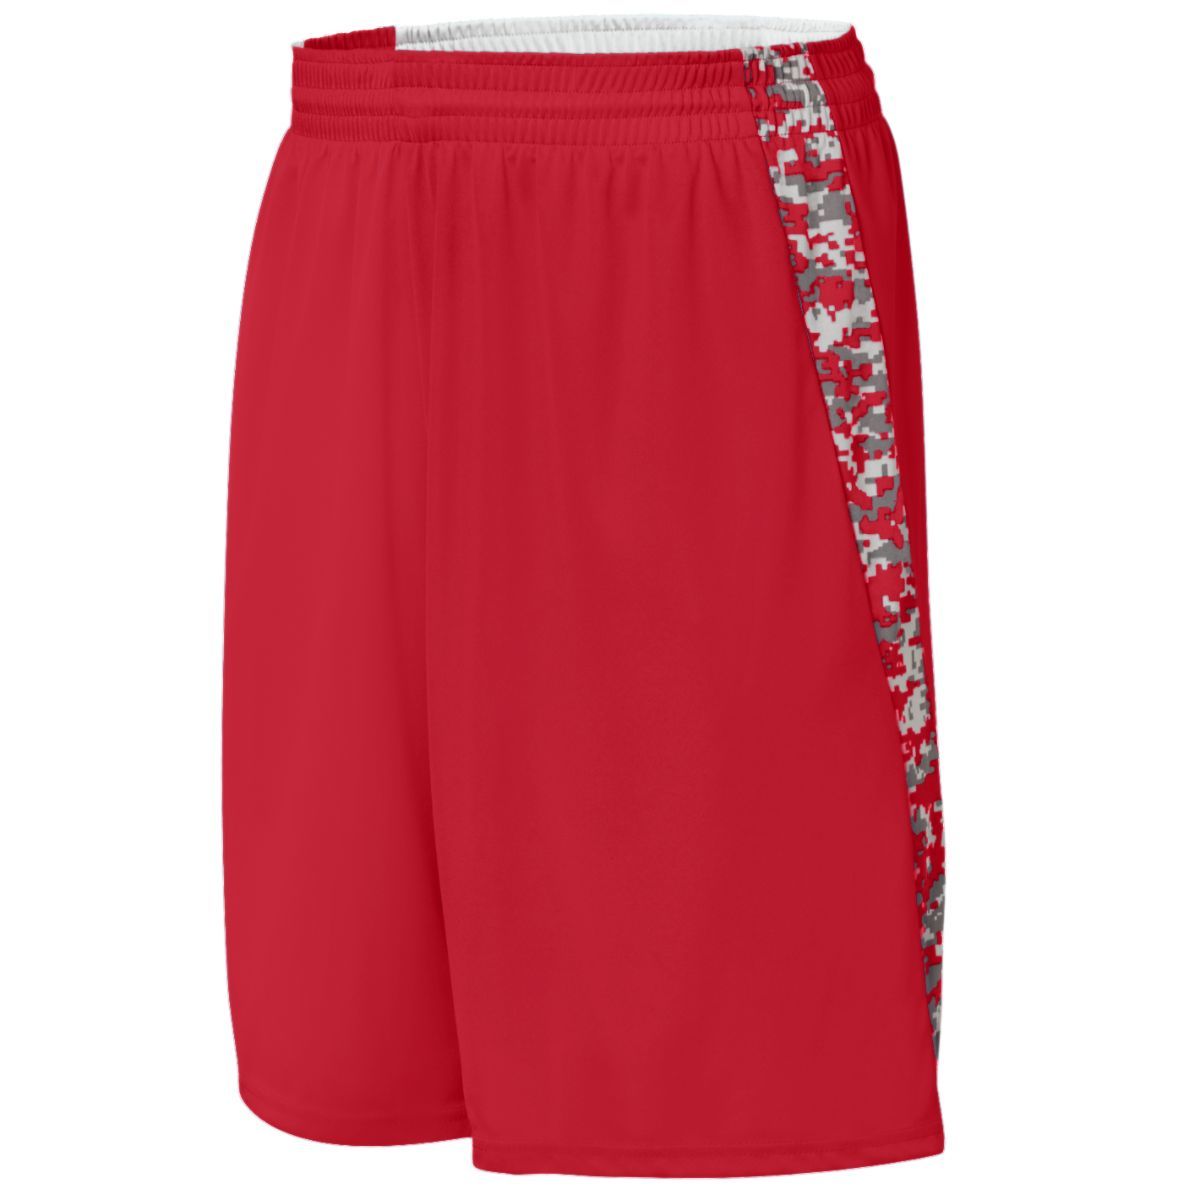 Augusta Sportswear Hook Shot Reversible Shorts in Red/Red Digi  -Part of the Adult, Adult-Shorts, Augusta-Products, Basketball, All-Sports, All-Sports-1 product lines at KanaleyCreations.com